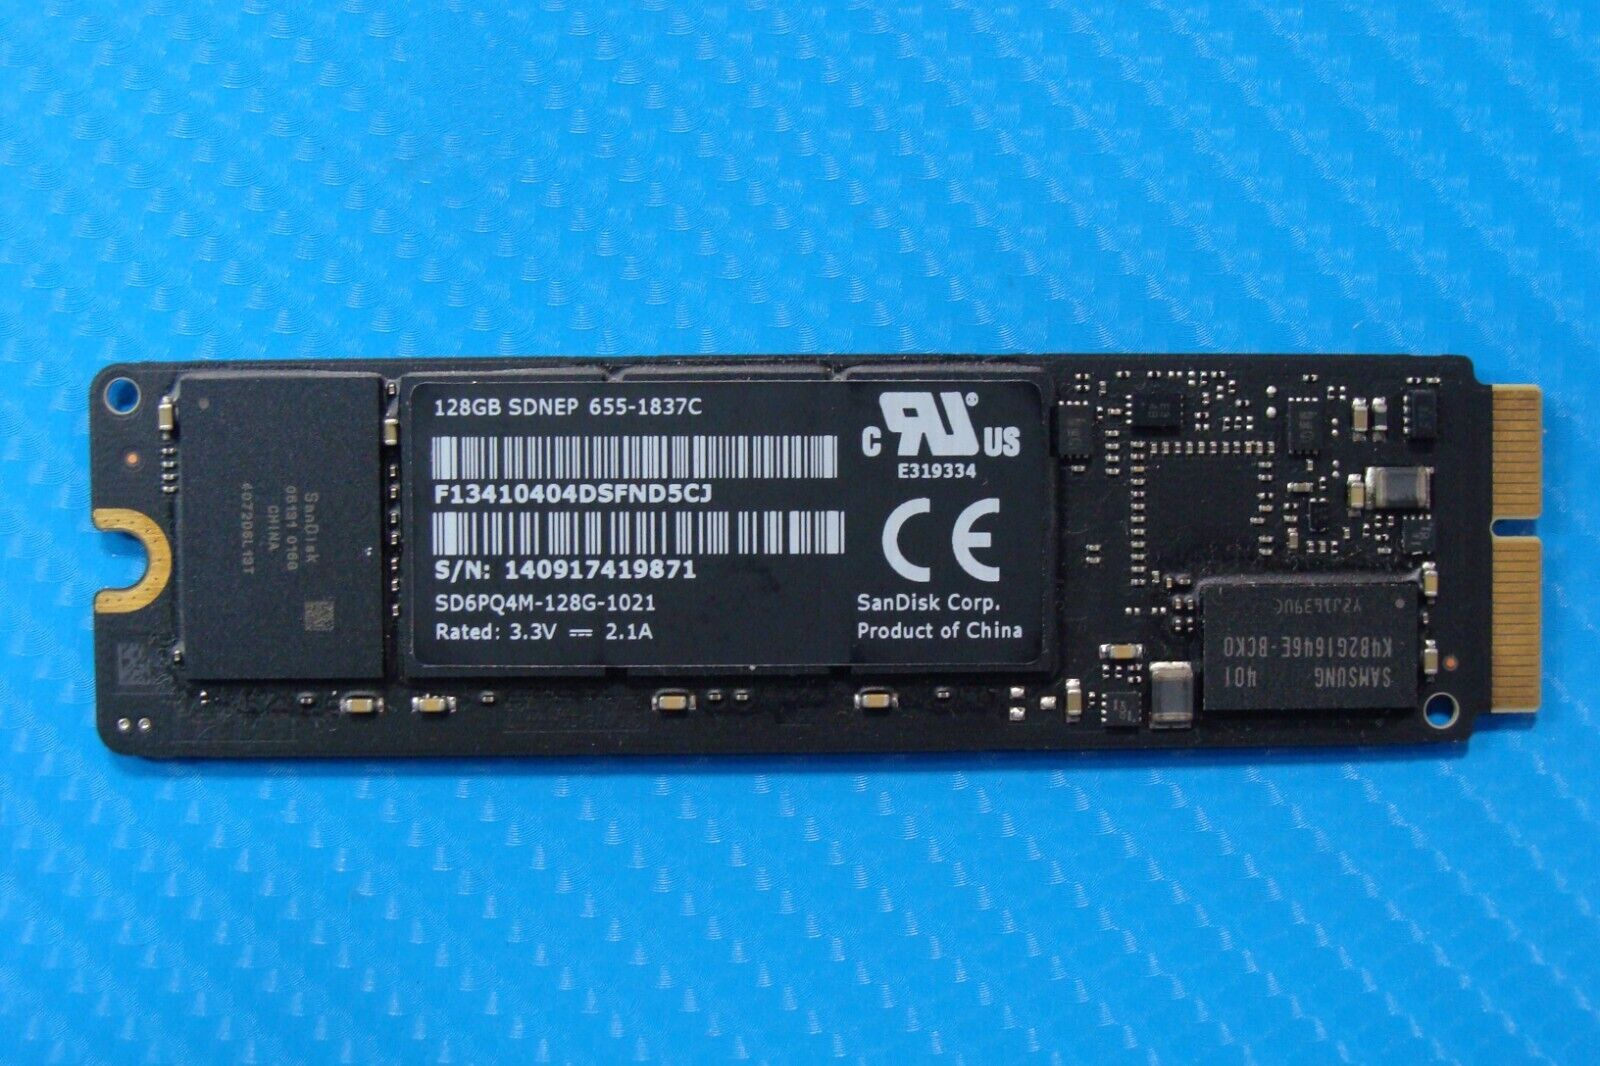 MacBook Air A1465 SanDisk 128GB SSD Solid State Drive SD6PQ4M-128G-1021 661-7458